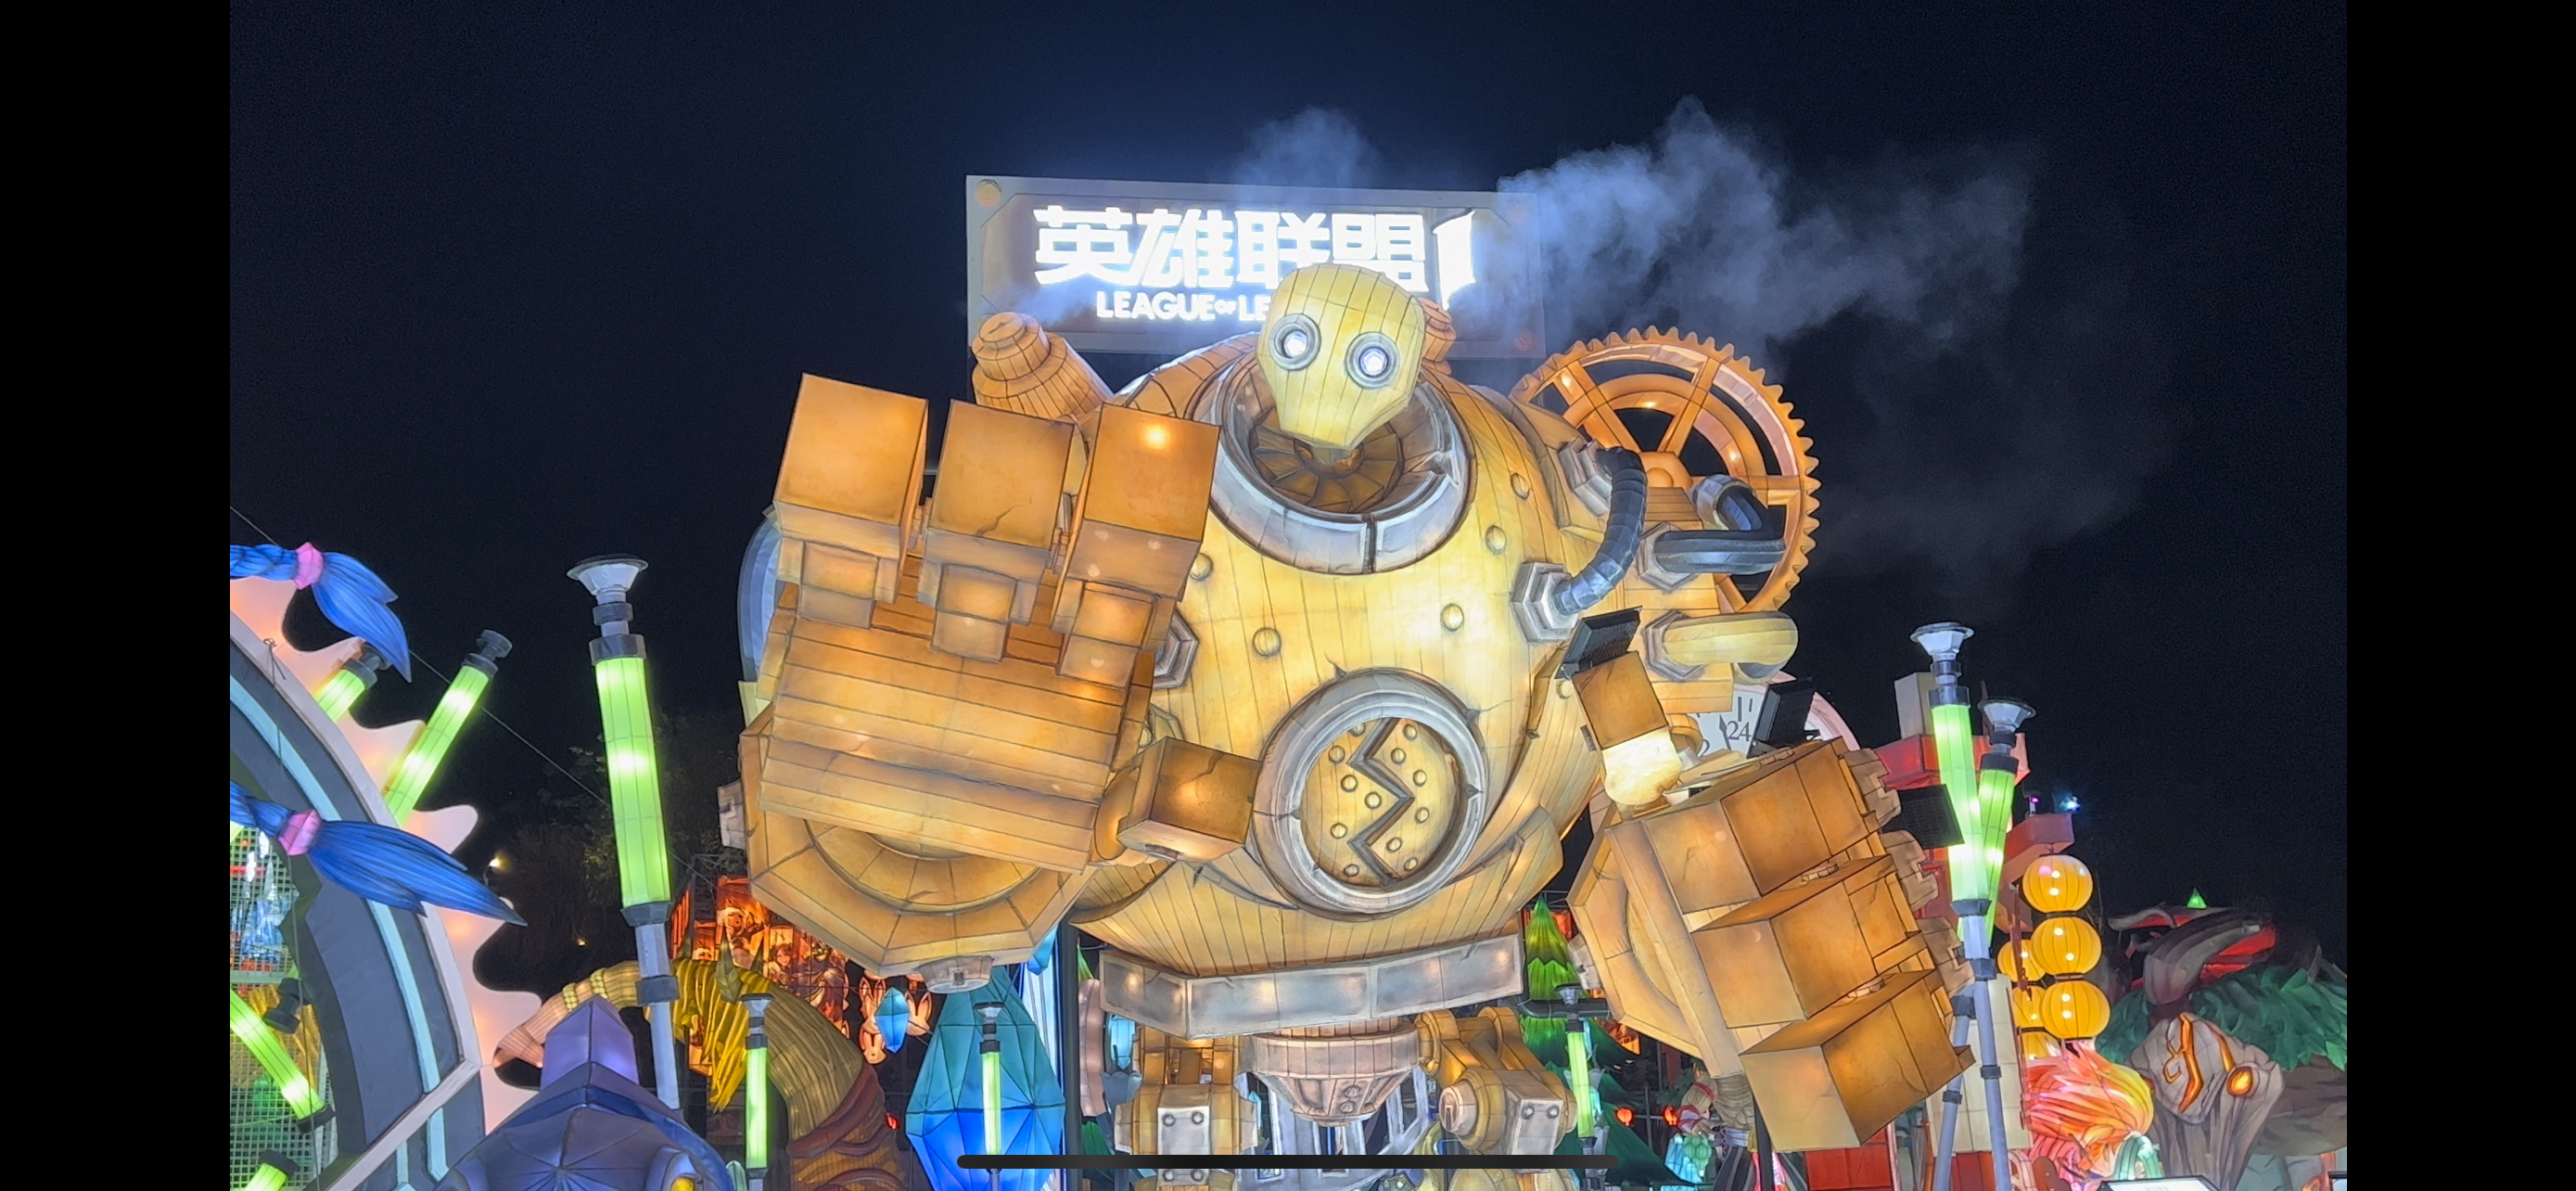 Discover the Spectacular League of Legends Themed Lantern Display at the Zigong Lantern Festival